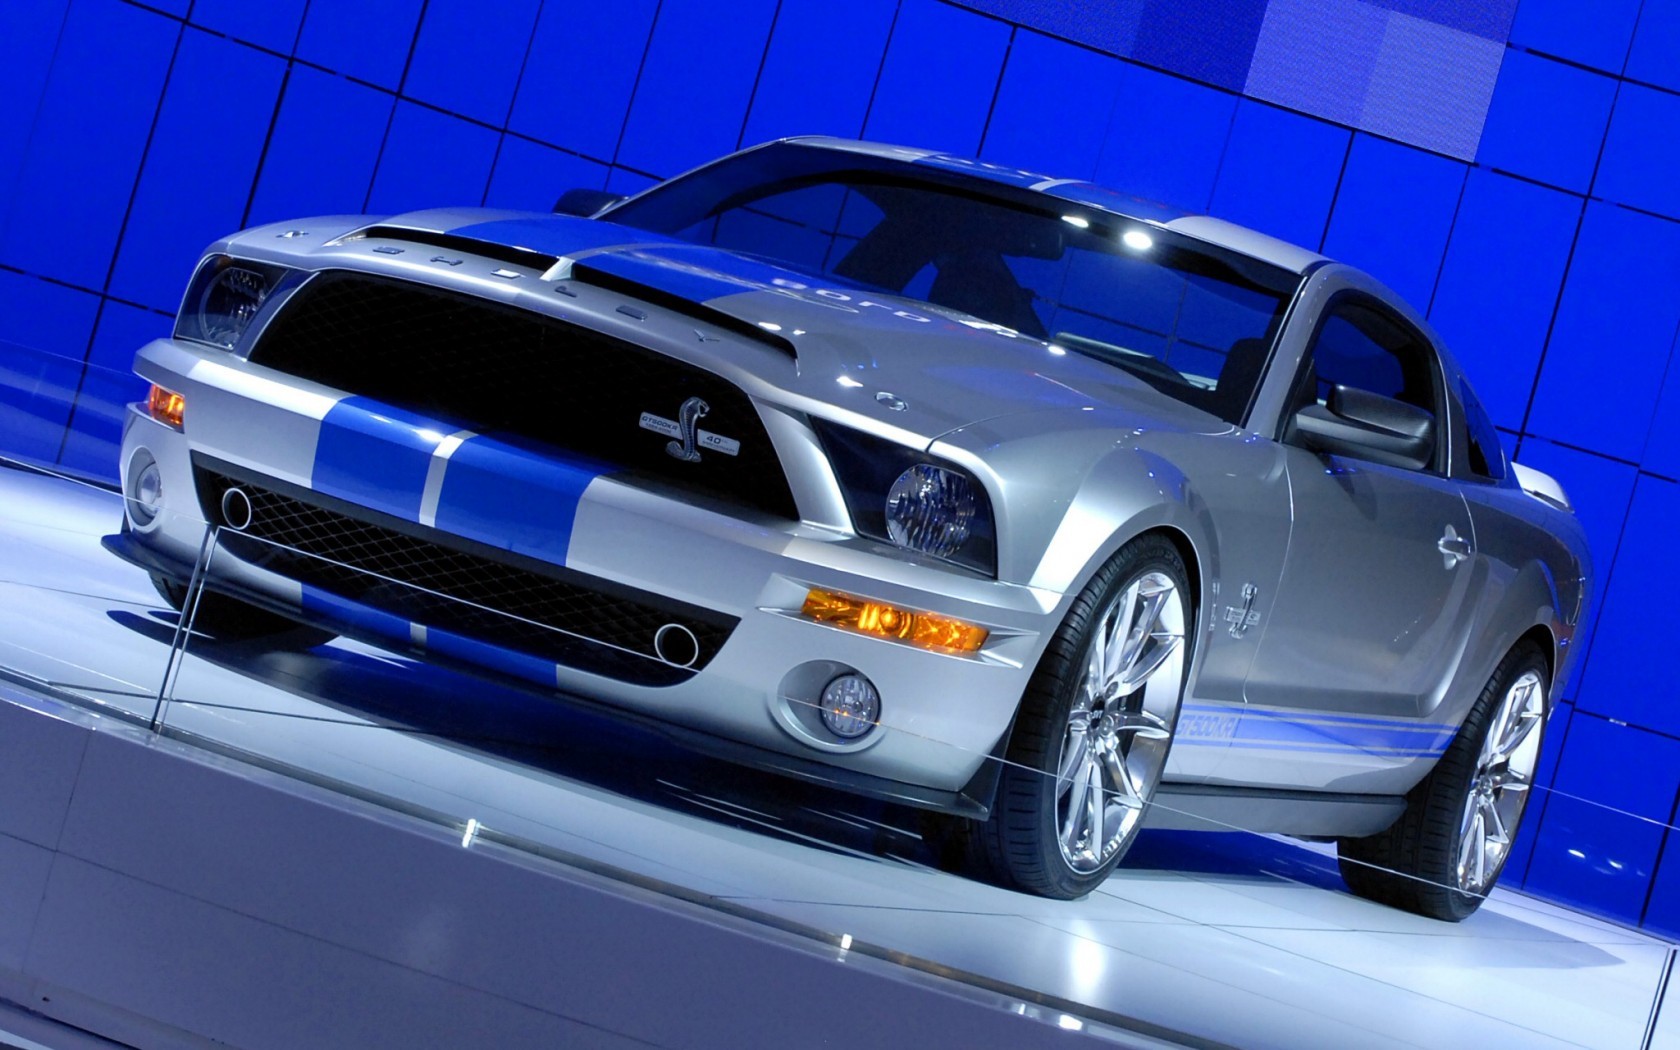 blue, Ford, Mustang, Complex, Magazine, Shelby, Gt500, Supersnake Wallpaper